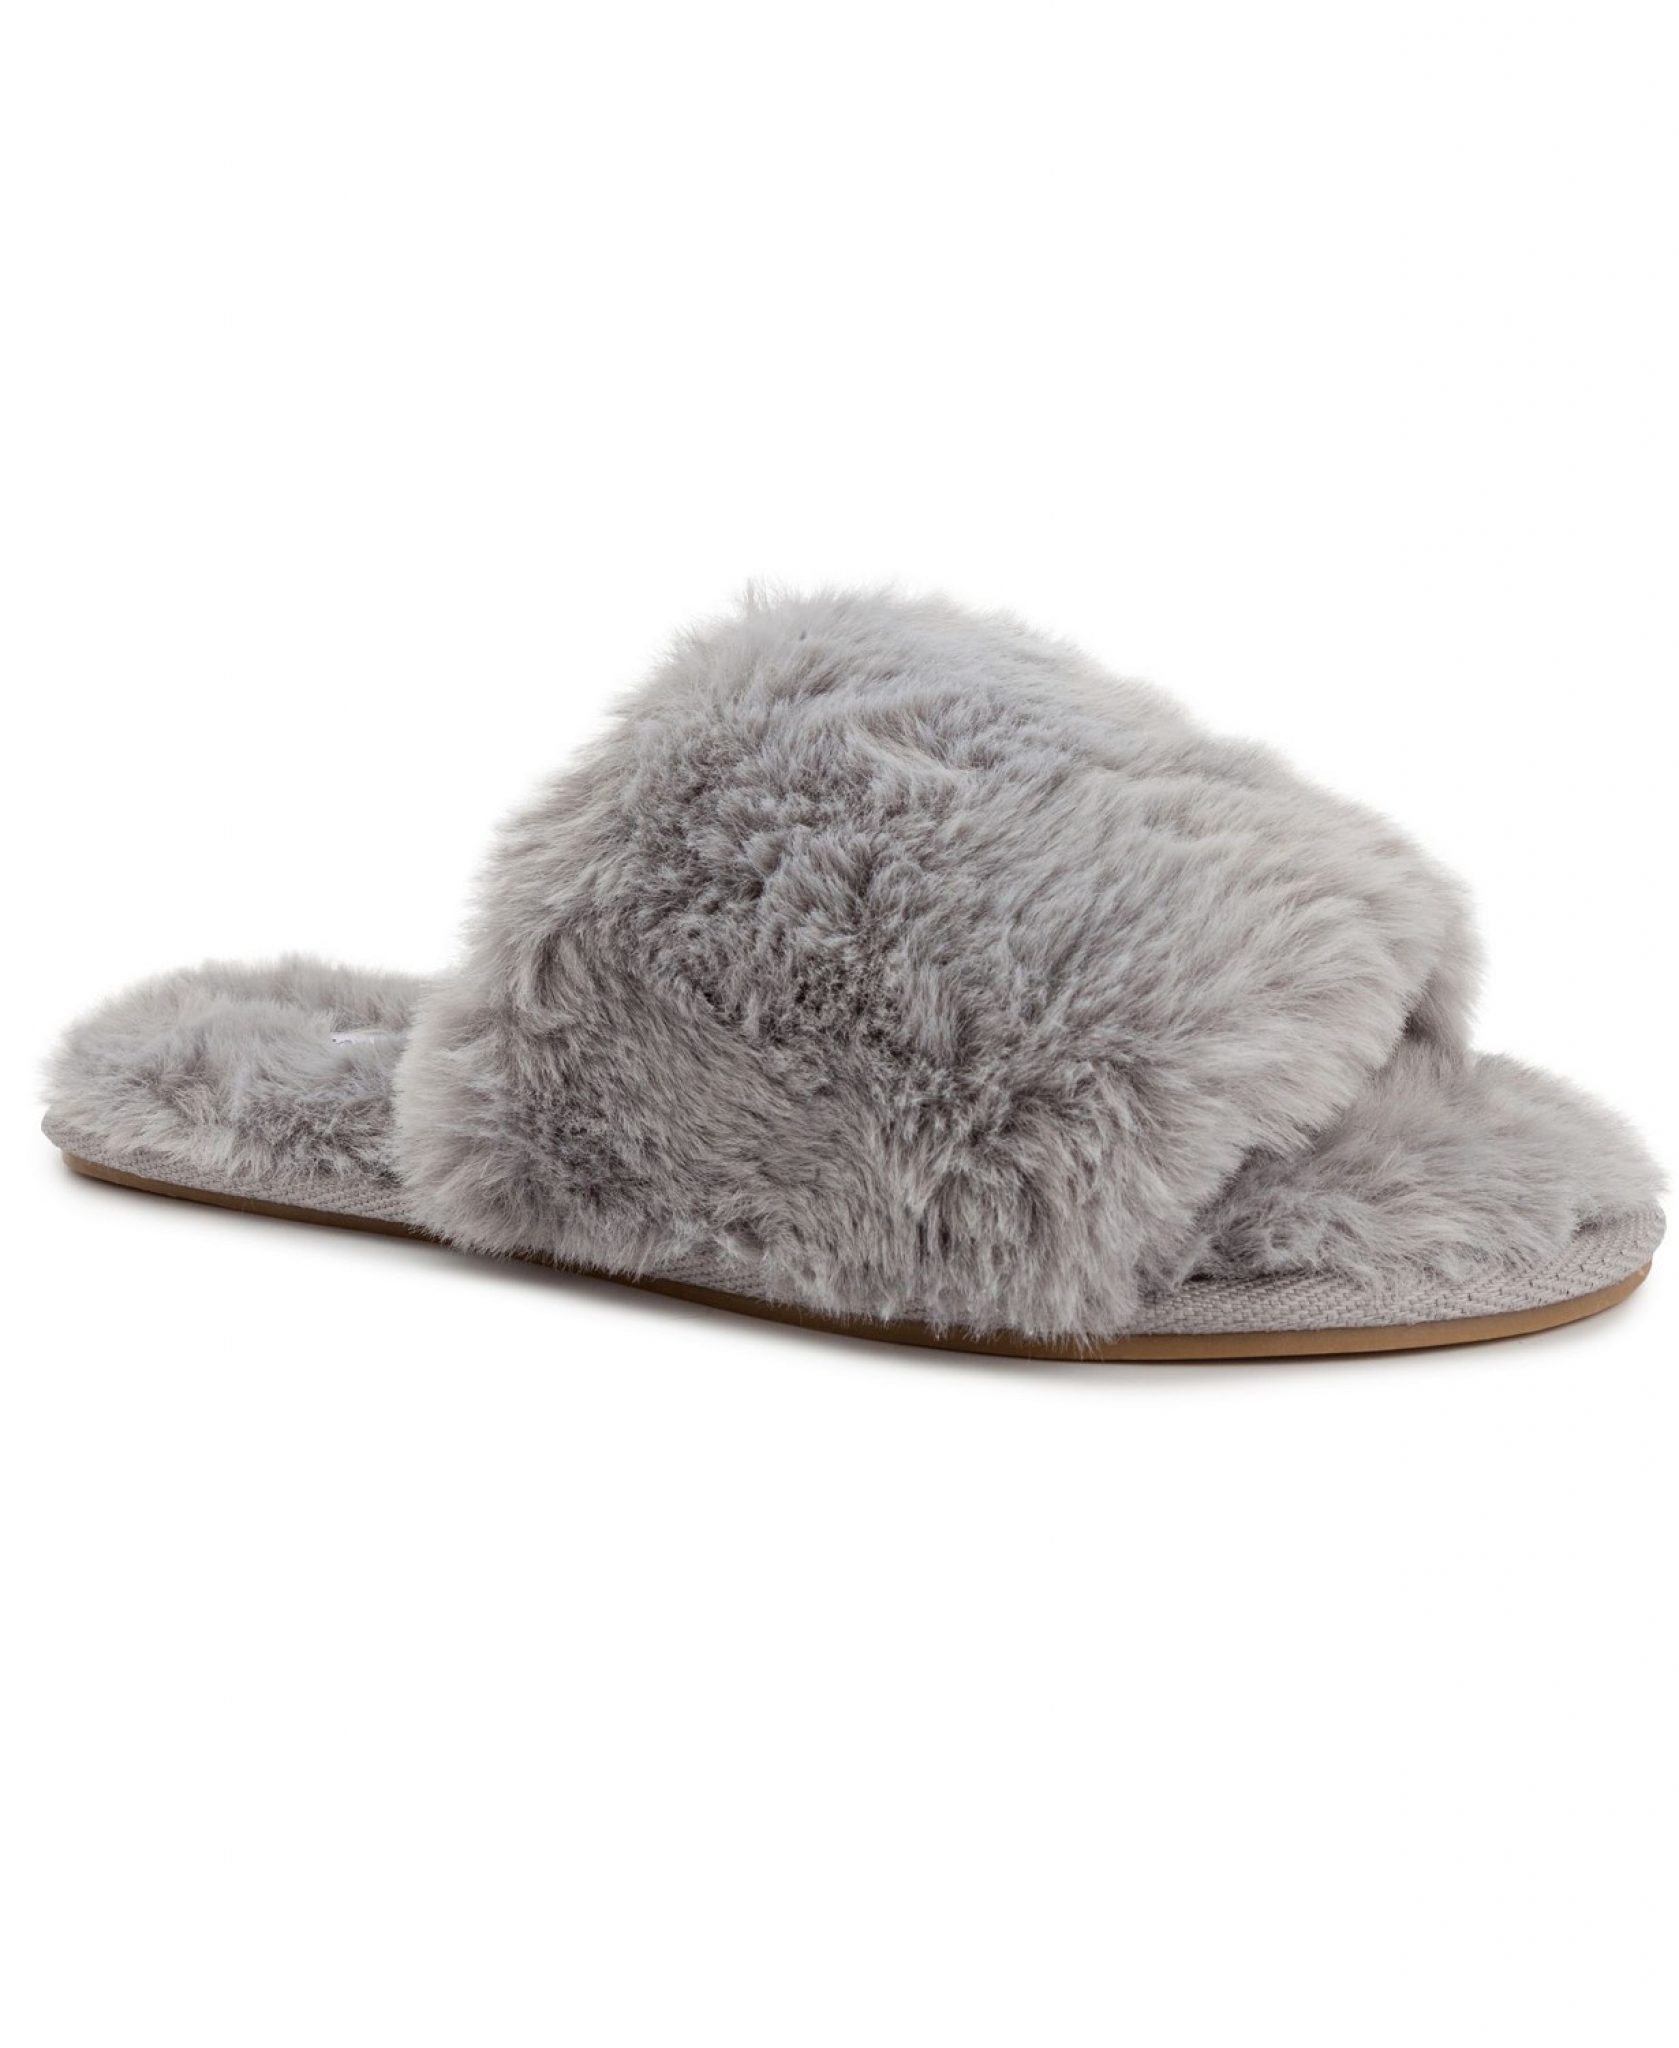 Women’s Lilly Fuzzy Slipper Limited Time Special at Macy’s! – Glitchndealz